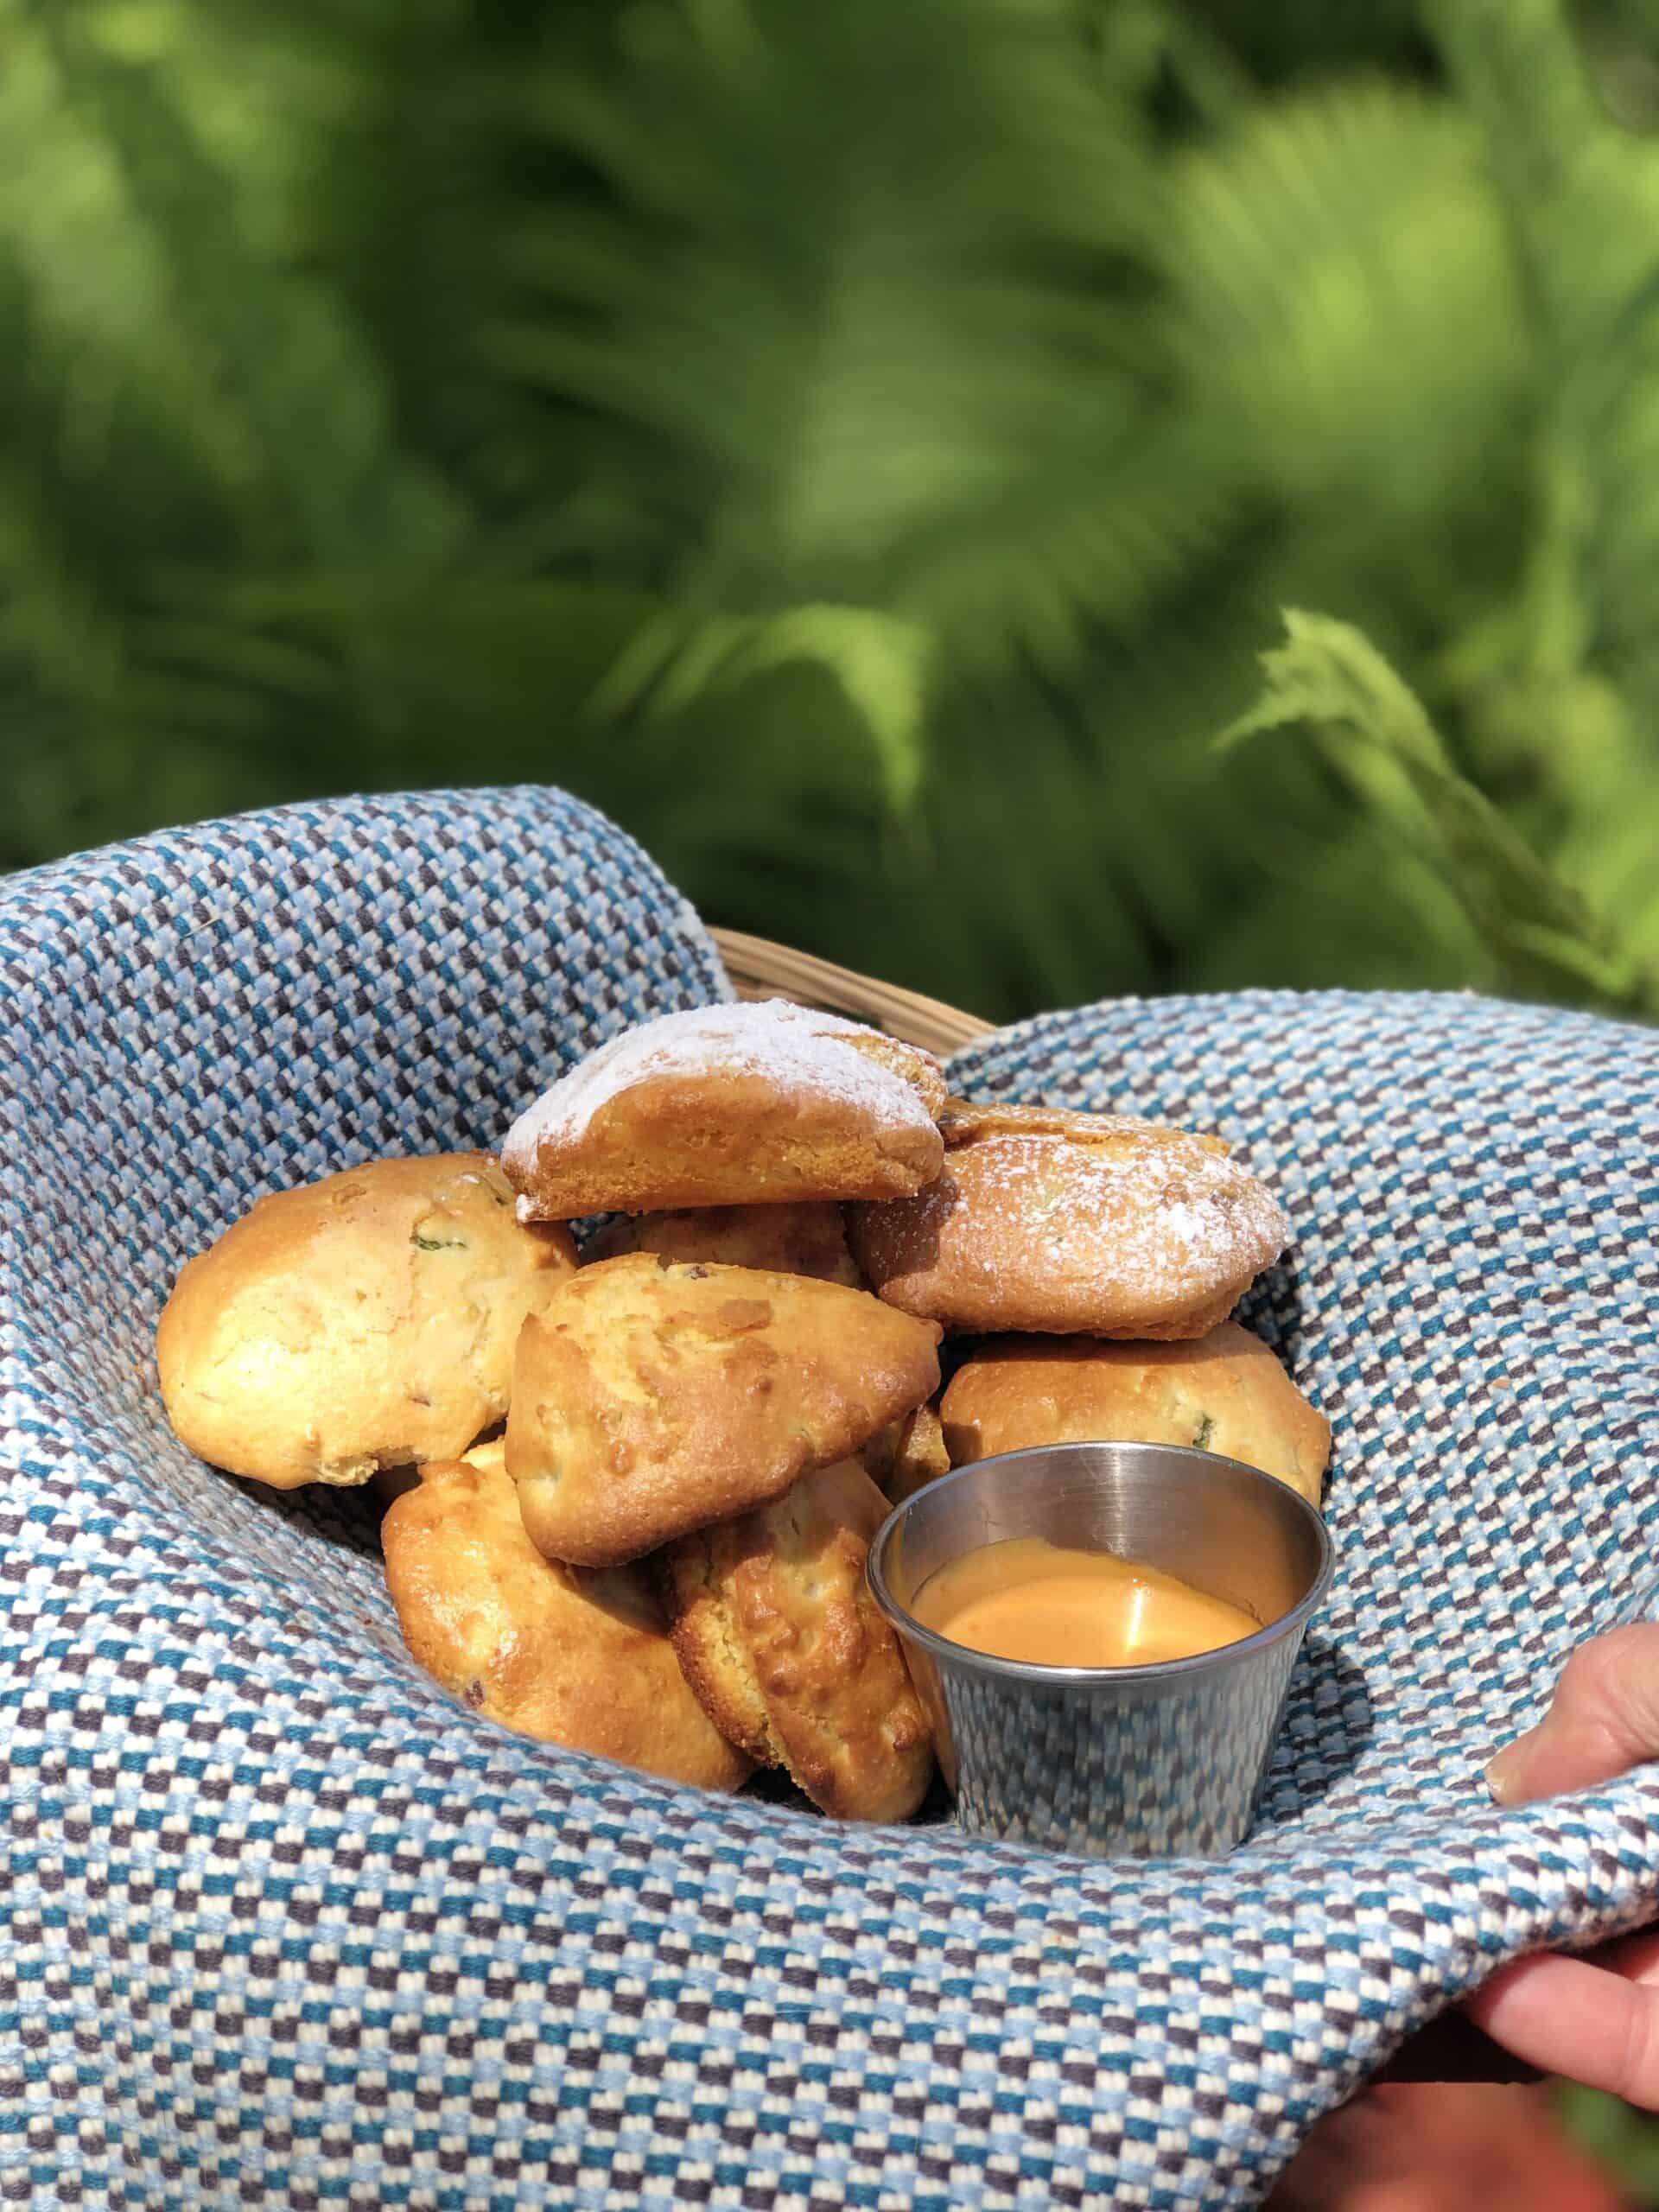 Basket of Southern Hushpuppies being held by a hand on a blue fabric placemat with a side of dipping sauce in a small stainless steel vessel